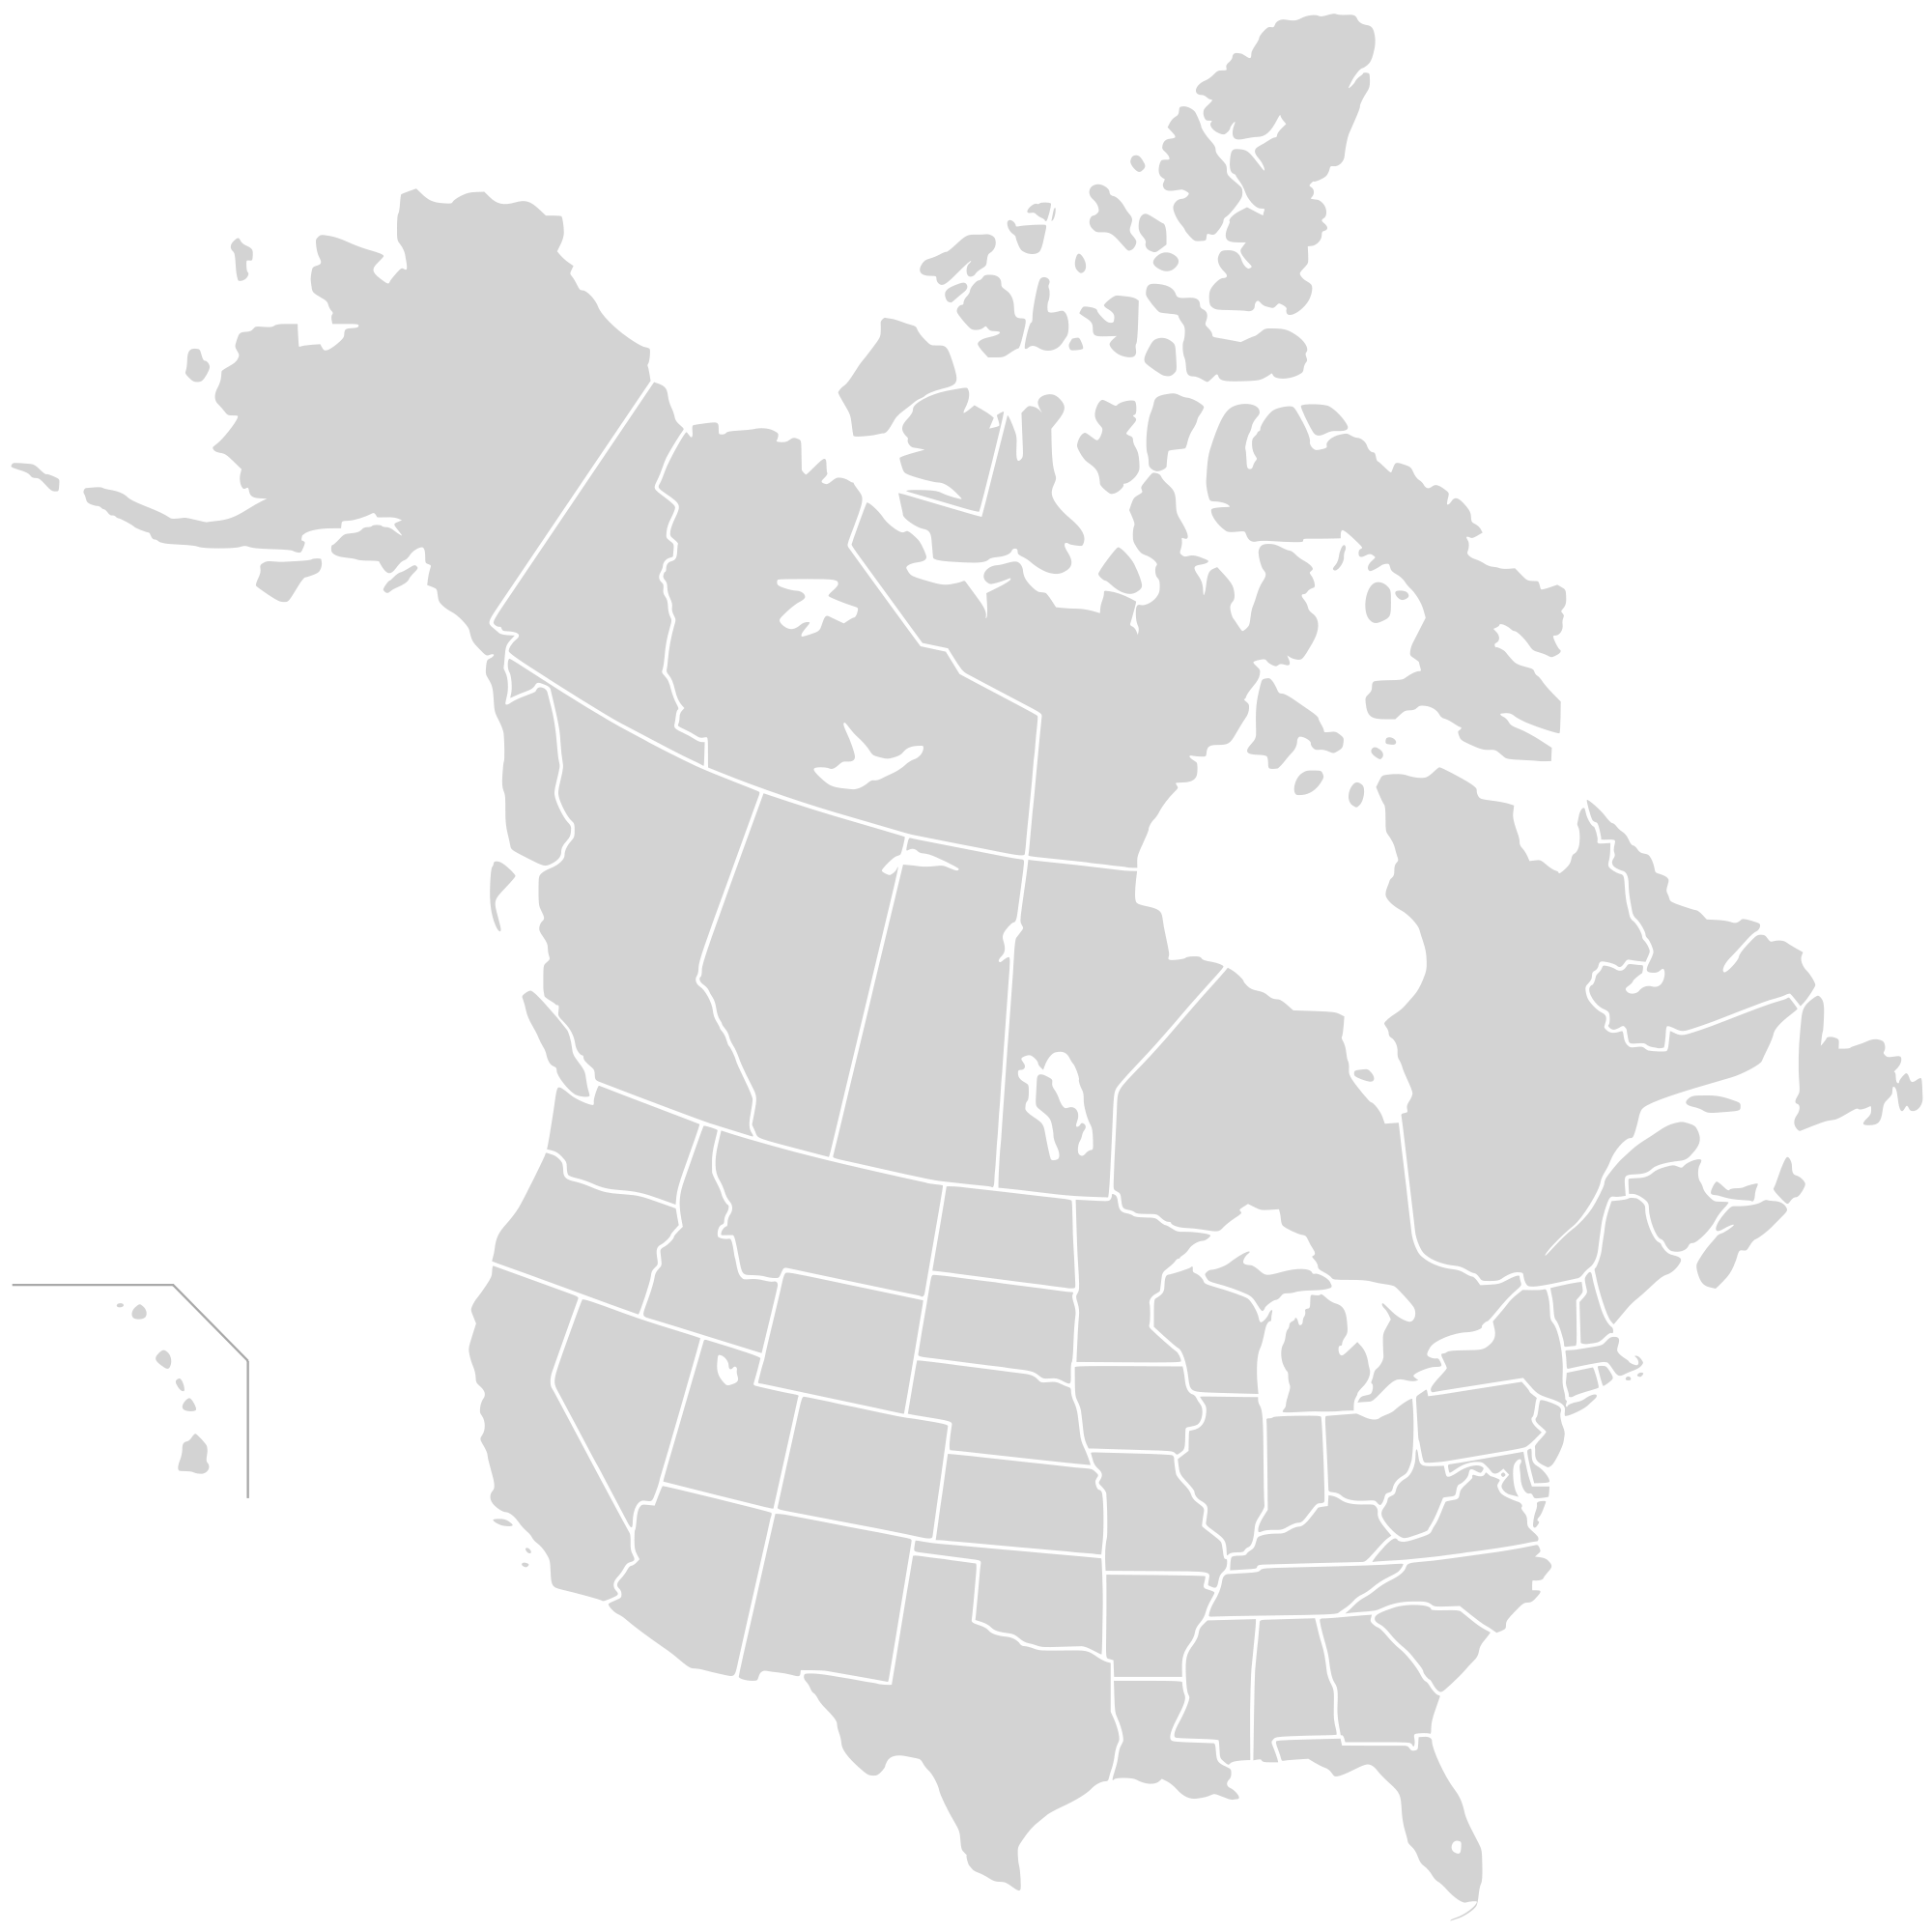 file-us-state-outline-map-png-wikipedia